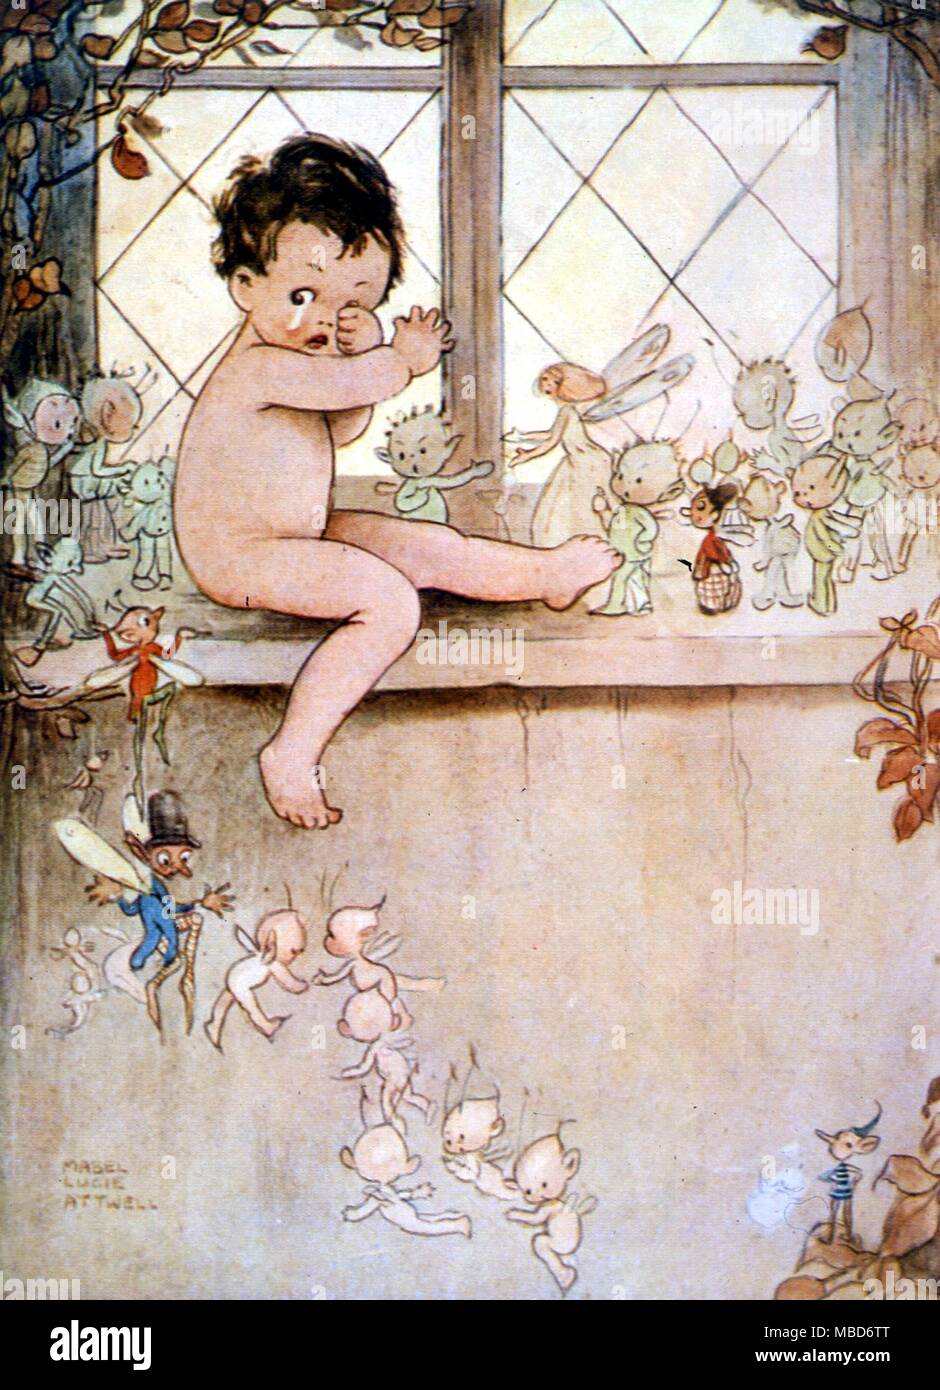 Peter Pan - But the window was barred - illustration by Mabel Lucie Attwell for Barrie's Peter Pan and Wendy, 1938 Stock Photo